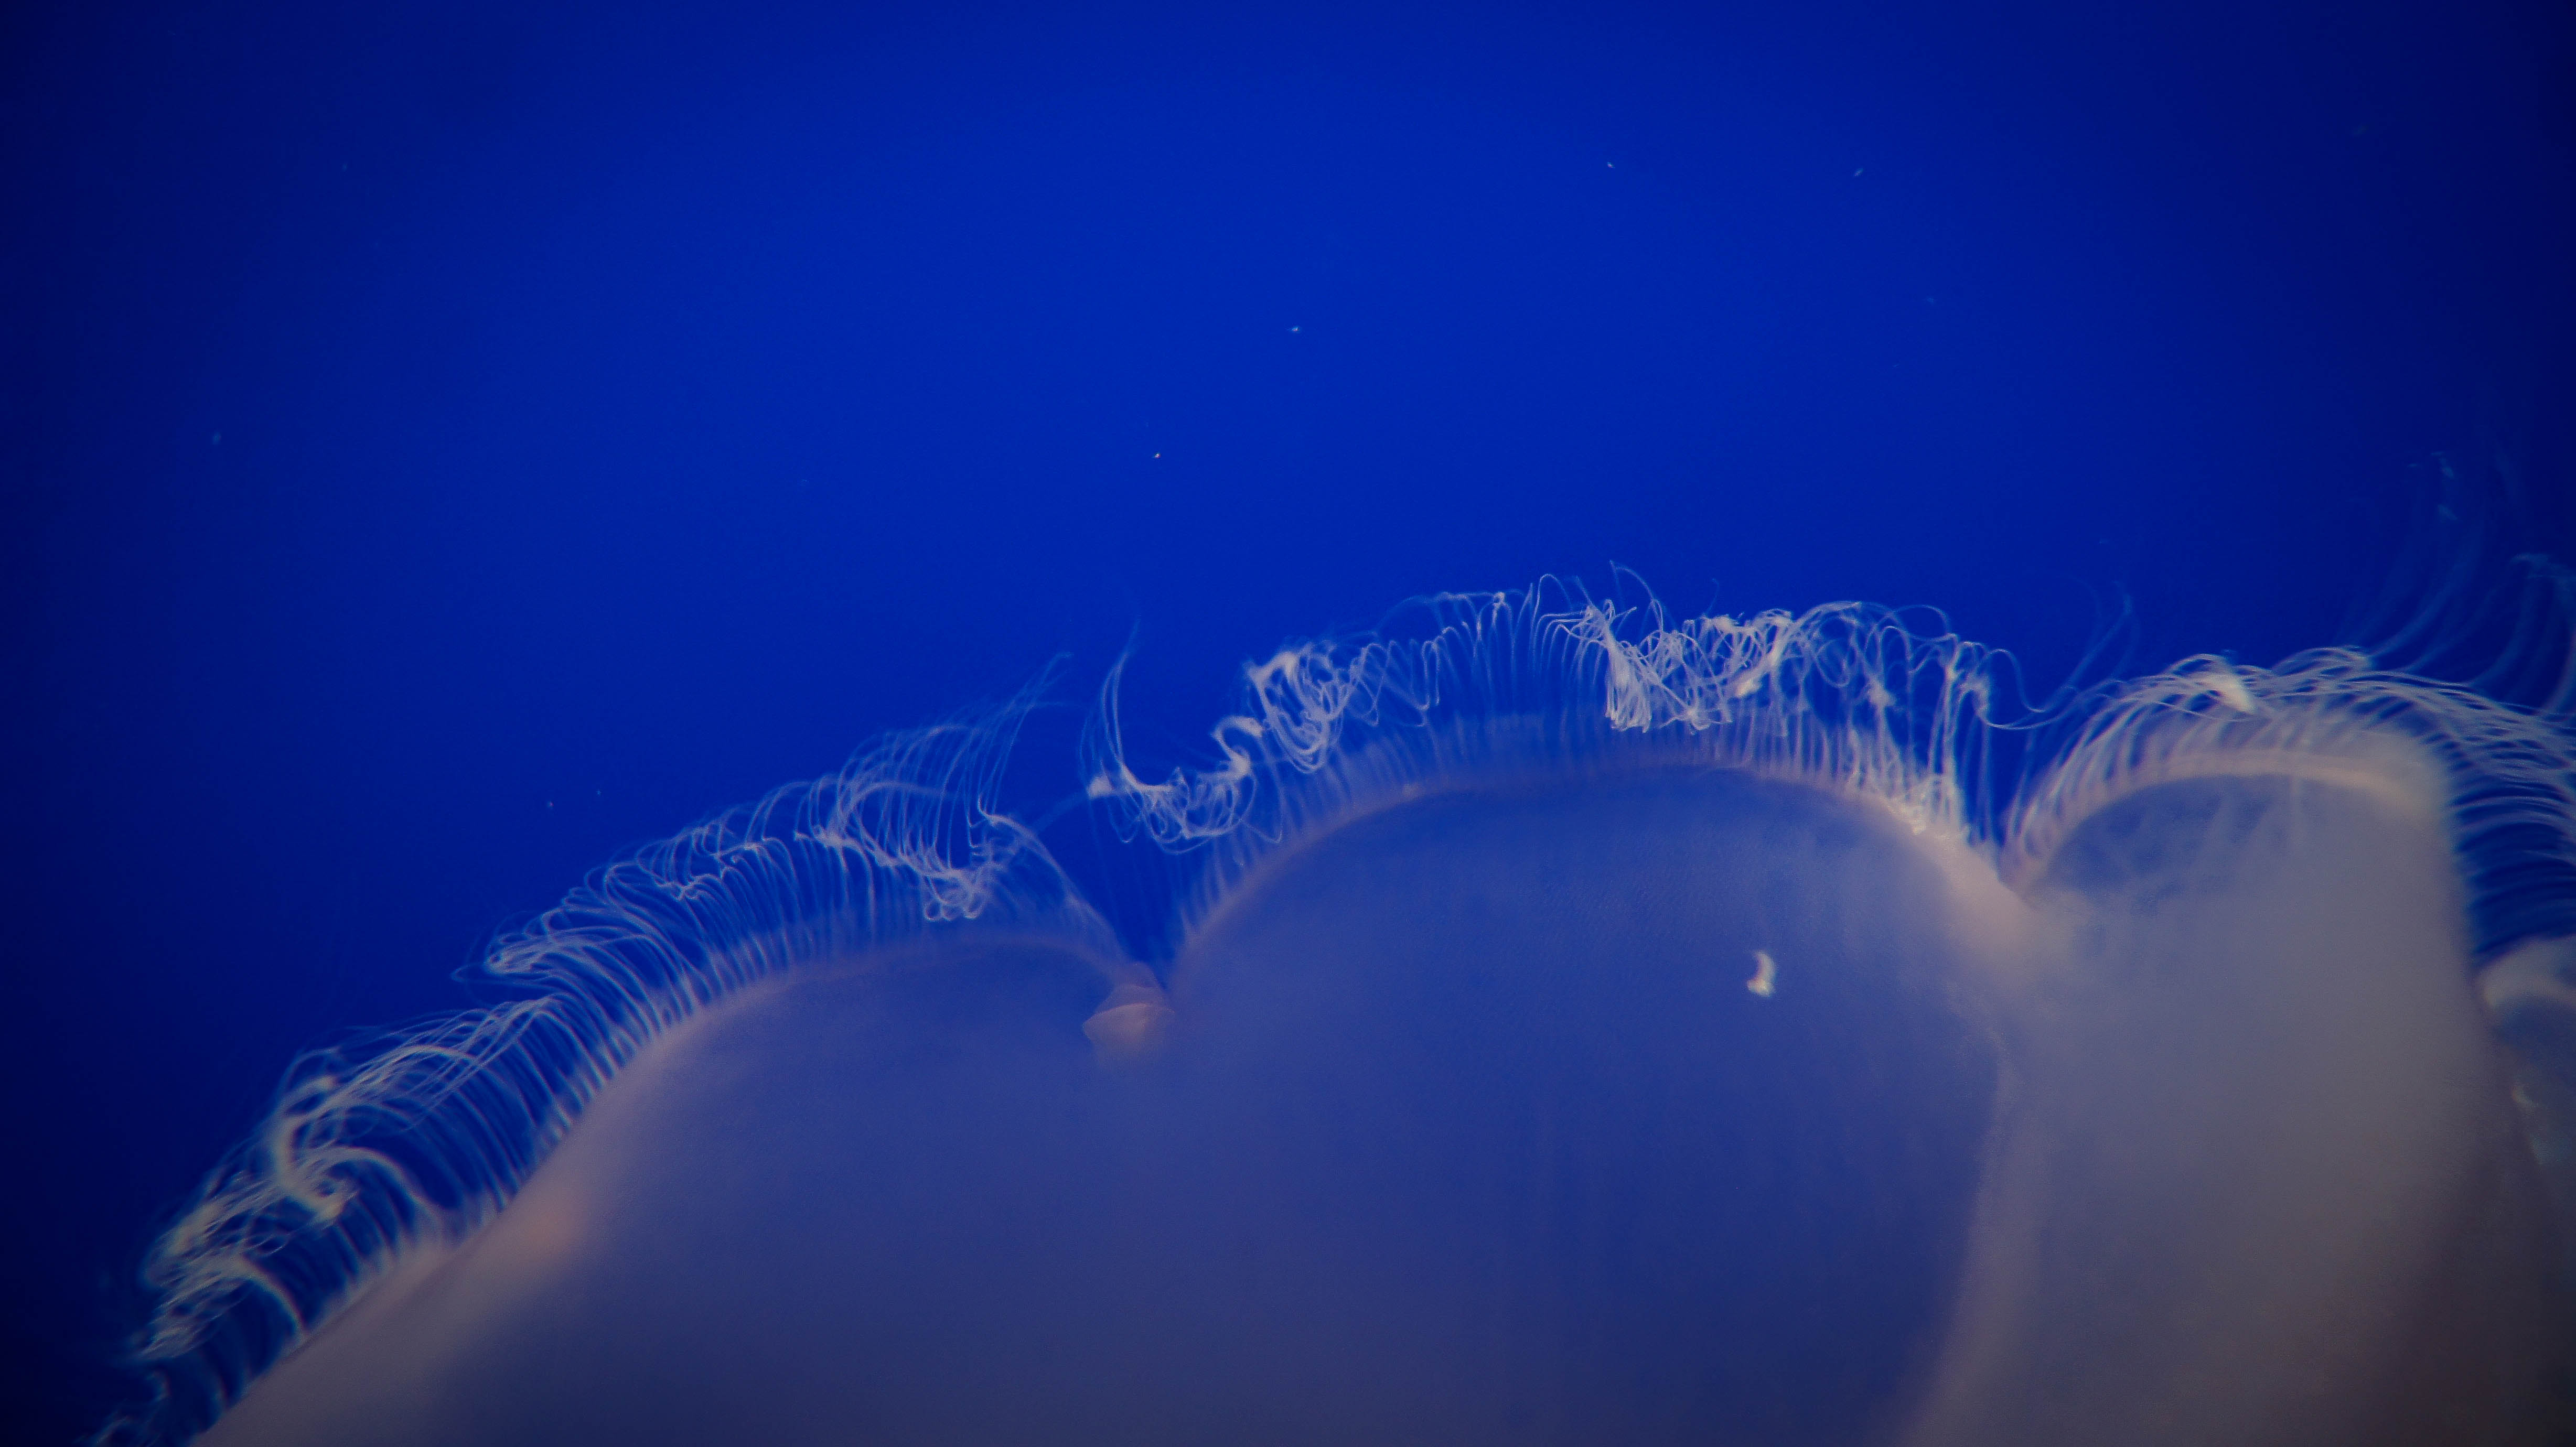 A moon jelly at the Monterey Bay Aquarium, showing how awe-inspiring moments can be collected when visiting another world (image © Sam Anaya A.).